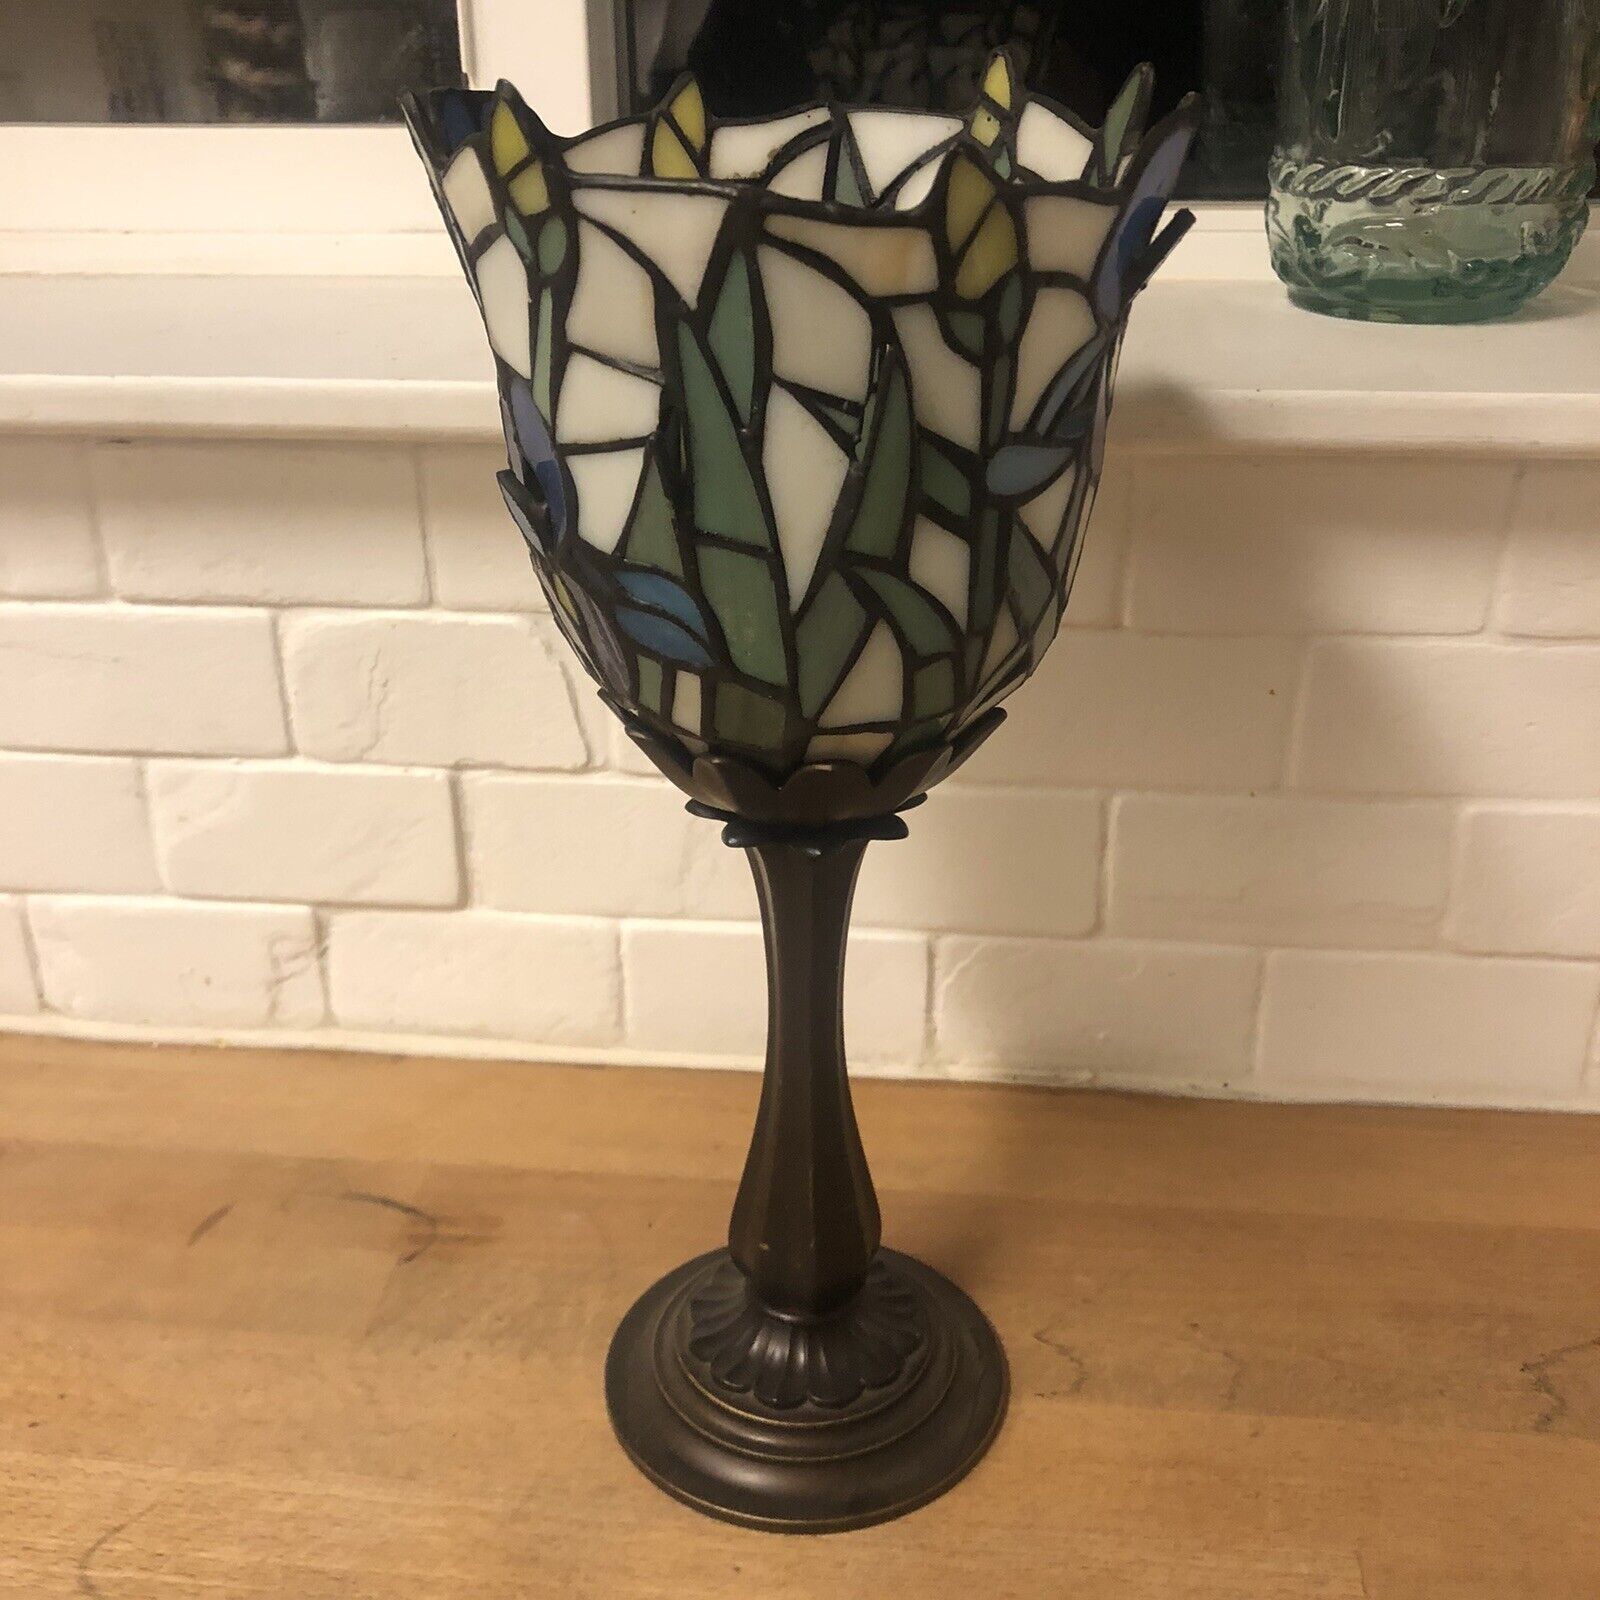 NIB PartyLite Iris Candle Lamp Tiffany Stained Leaded Glass Mosaic Brass Base